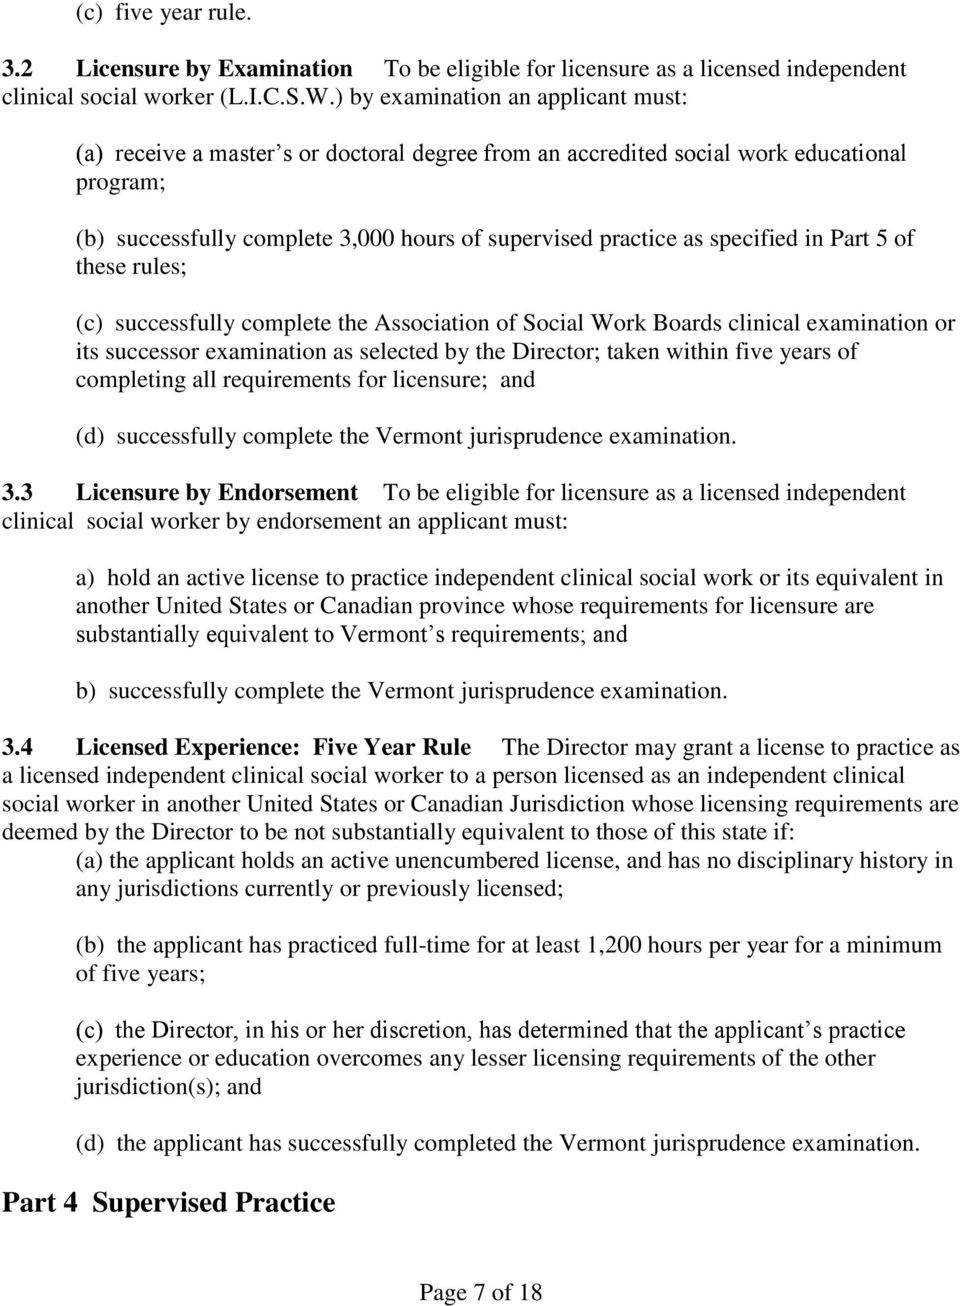 specified in Part 5 of these rules; (c) successfully complete the Association of Social Work Boards clinical examination or its successor examination as selected by the Director; taken within five